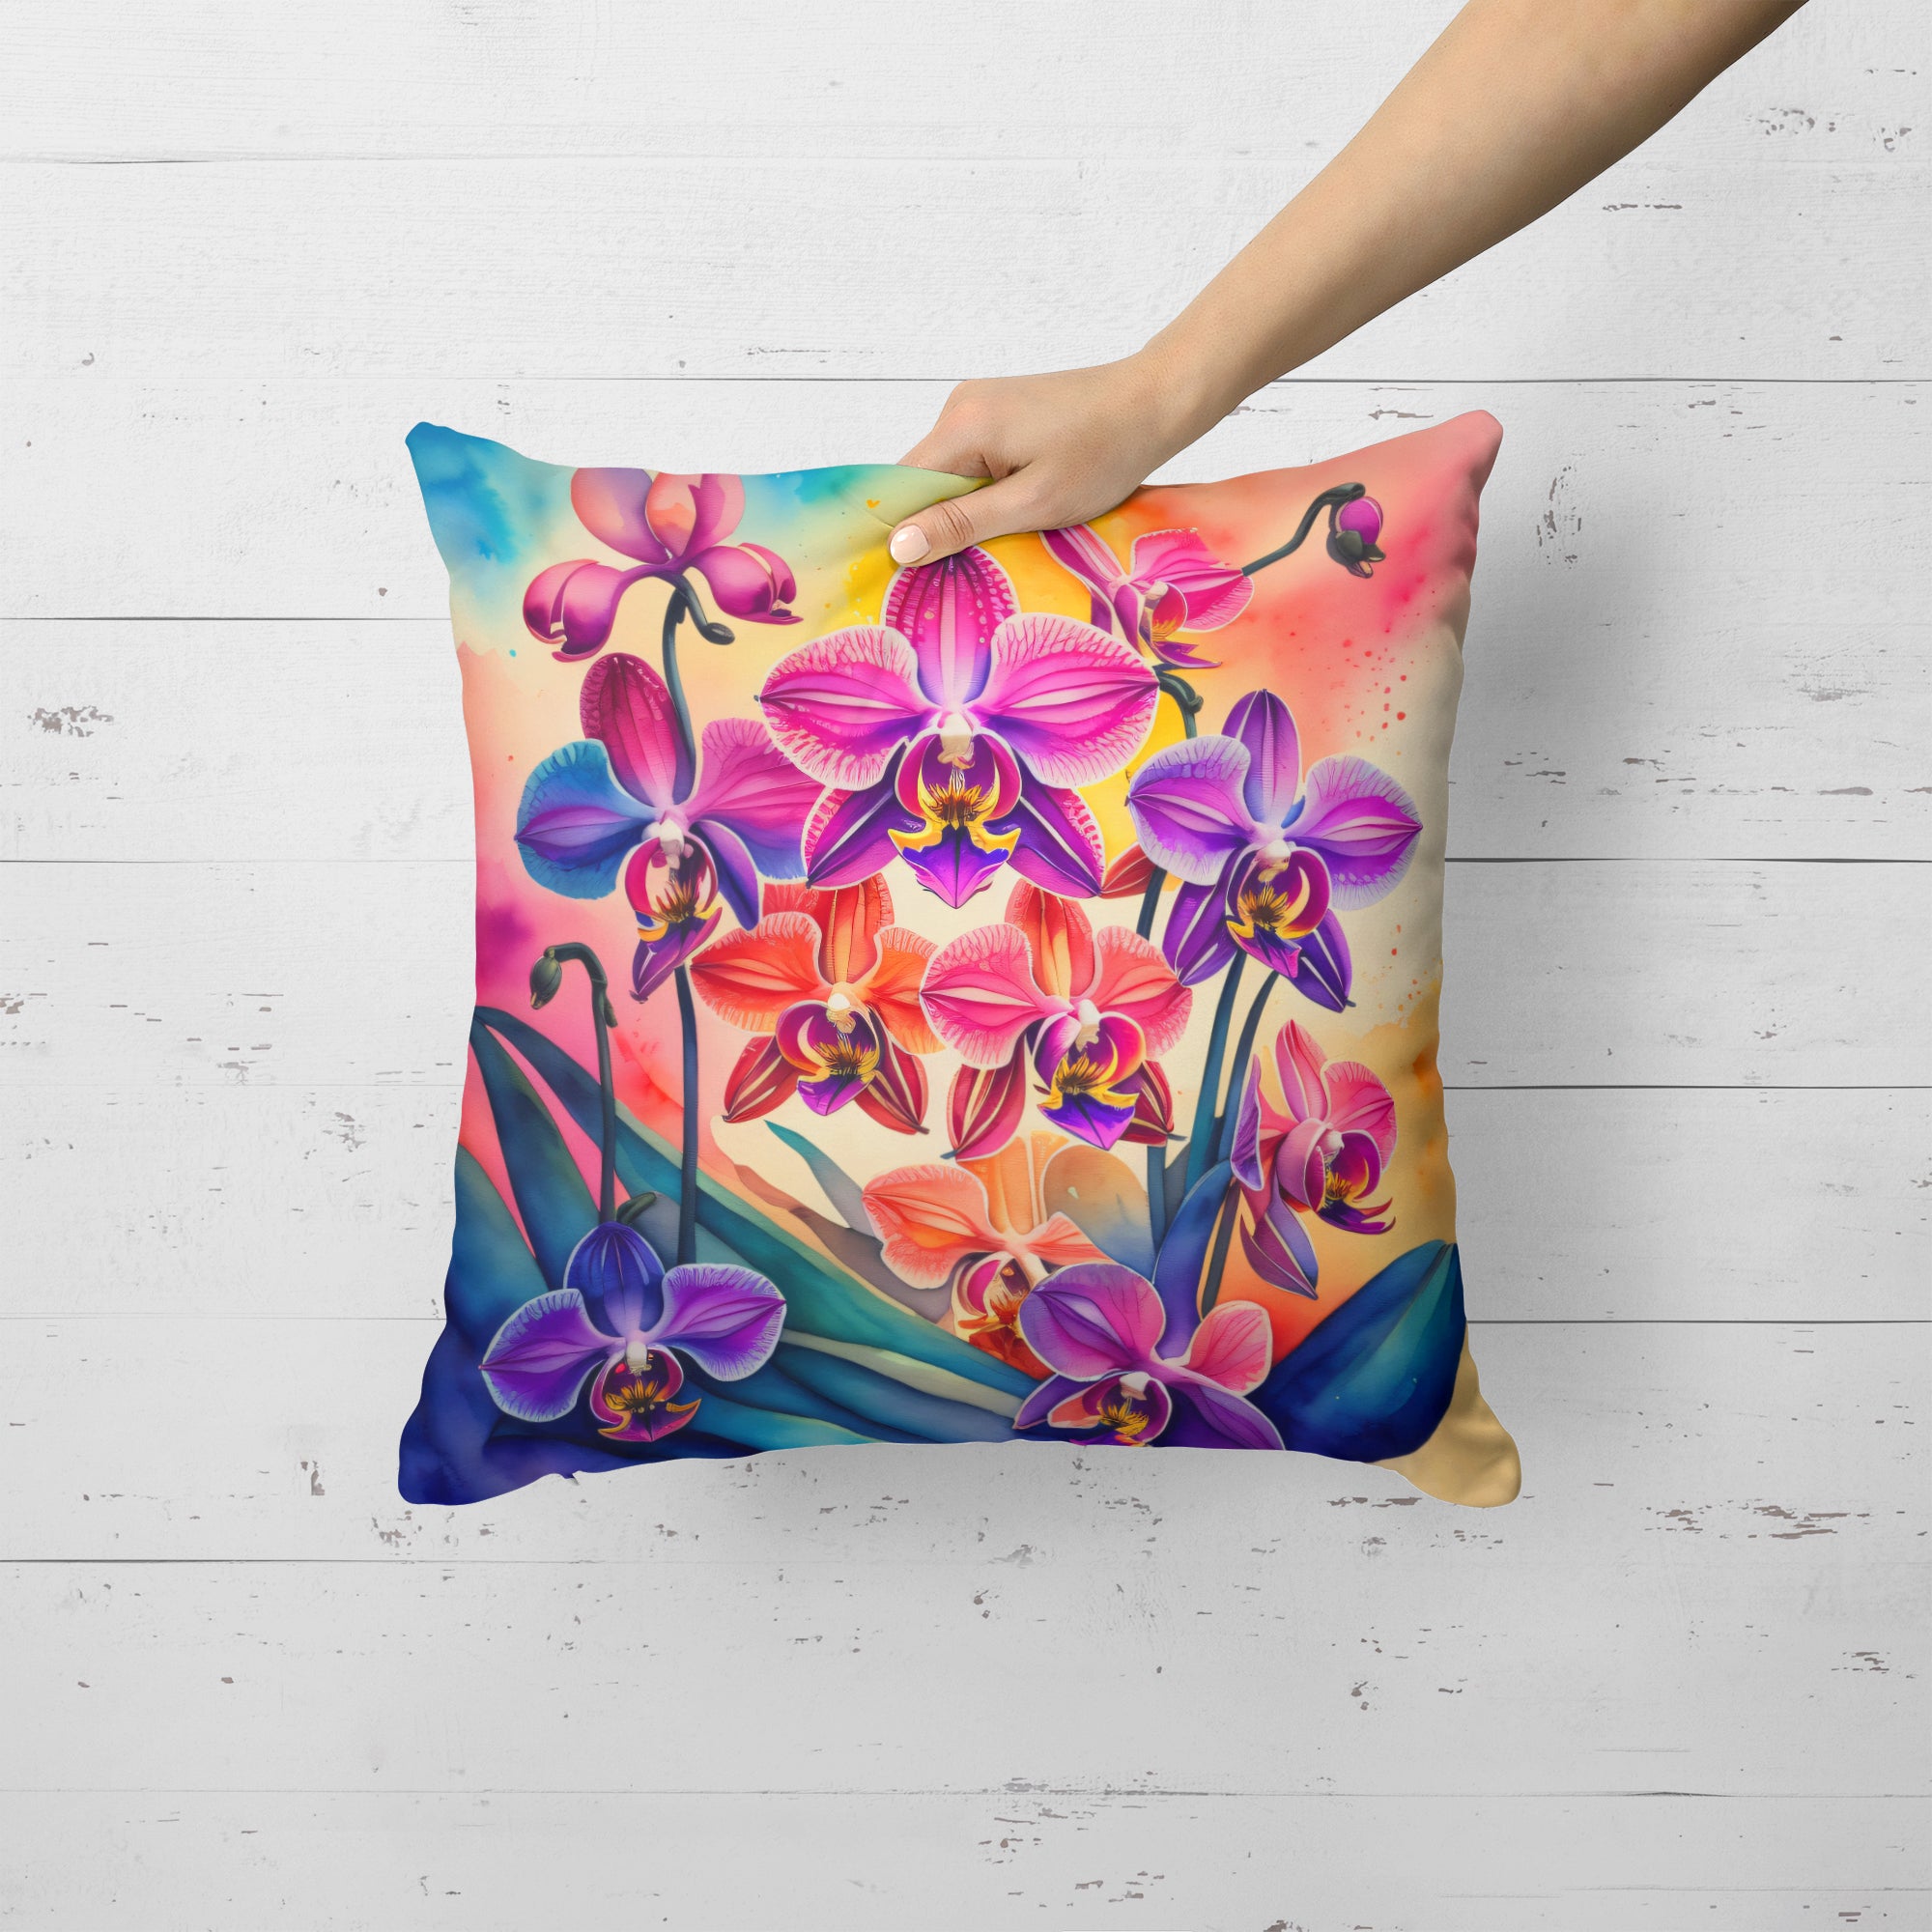 Buy this Colorful Orchids Fabric Decorative Pillow